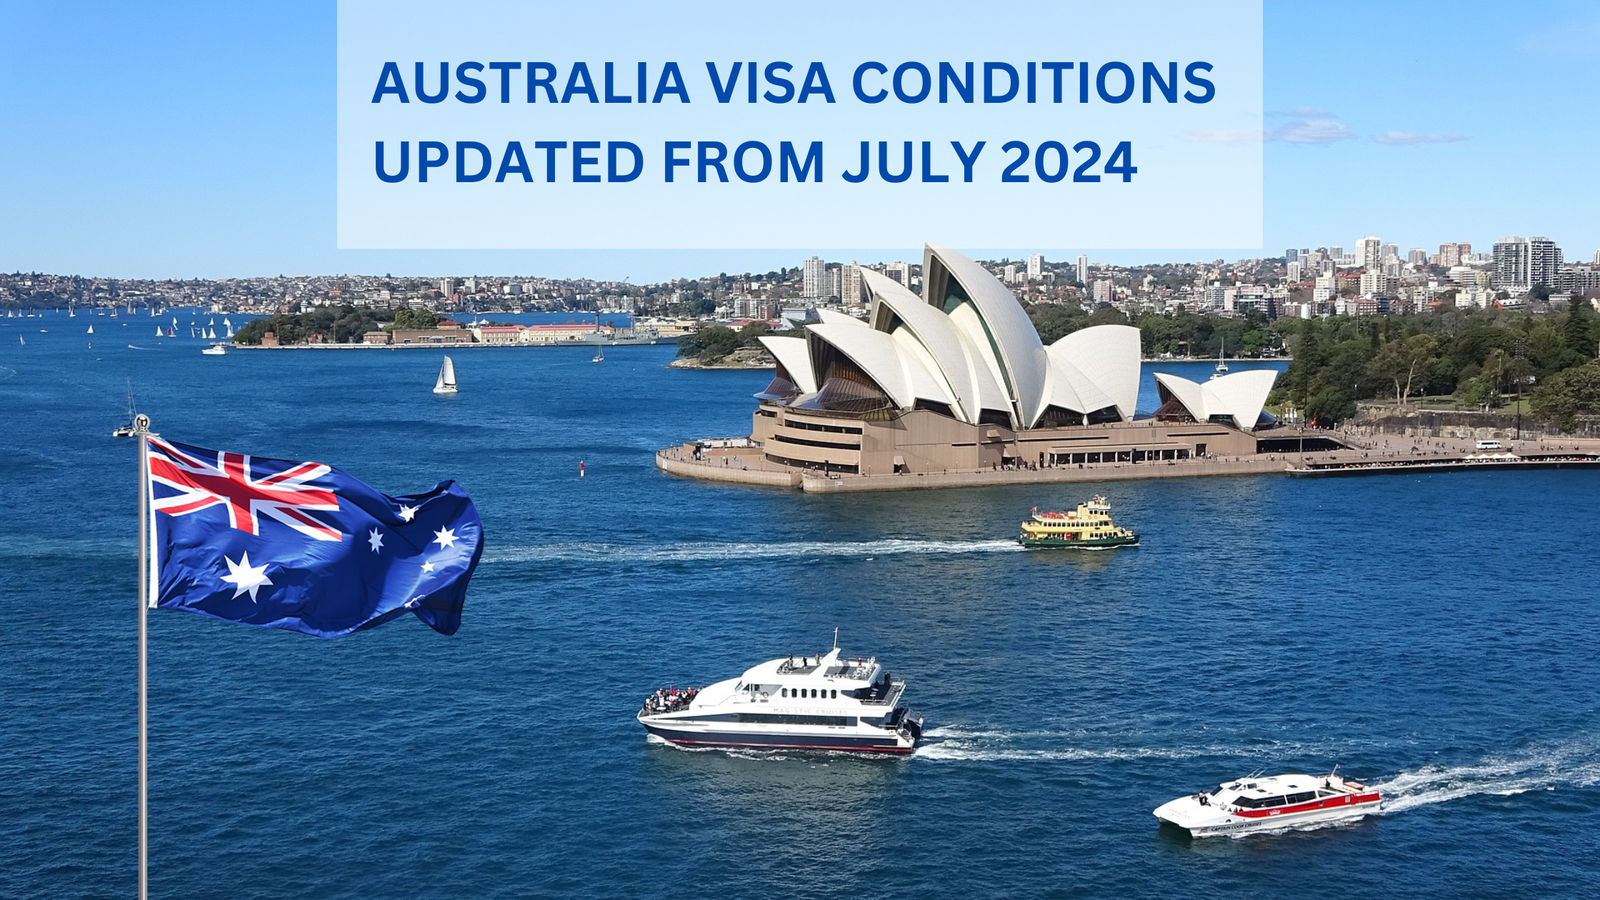 Australia Visa Conditions Updated from July 2024